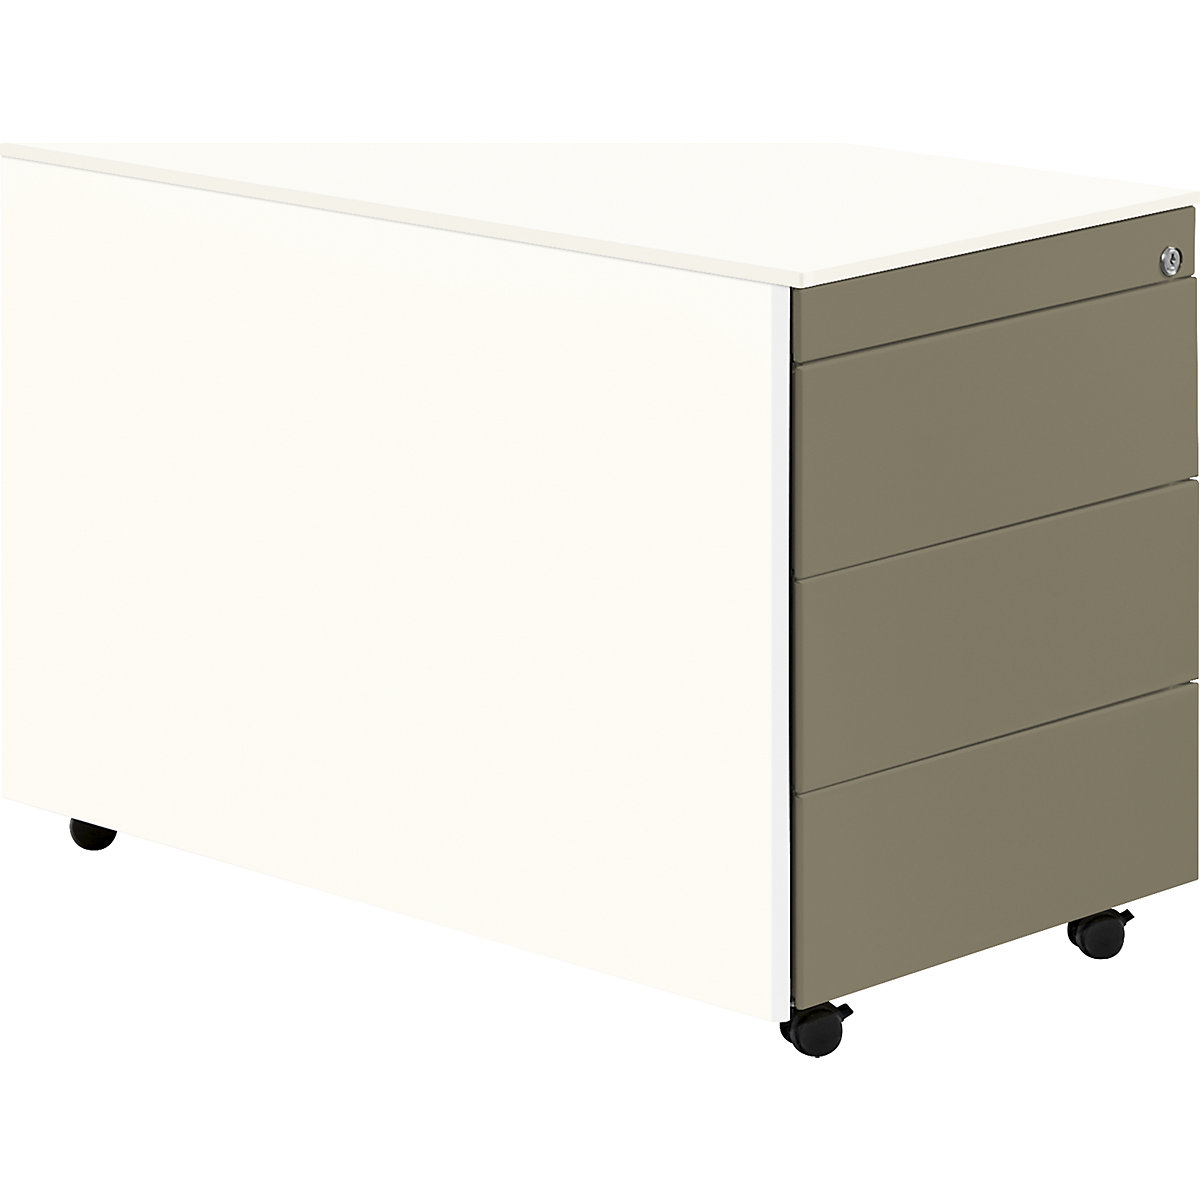 Drawer pedestal with castors – mauser, HxD 570 x 800 mm, steel top, 3 drawers, pure white / beige grey / pure white-13